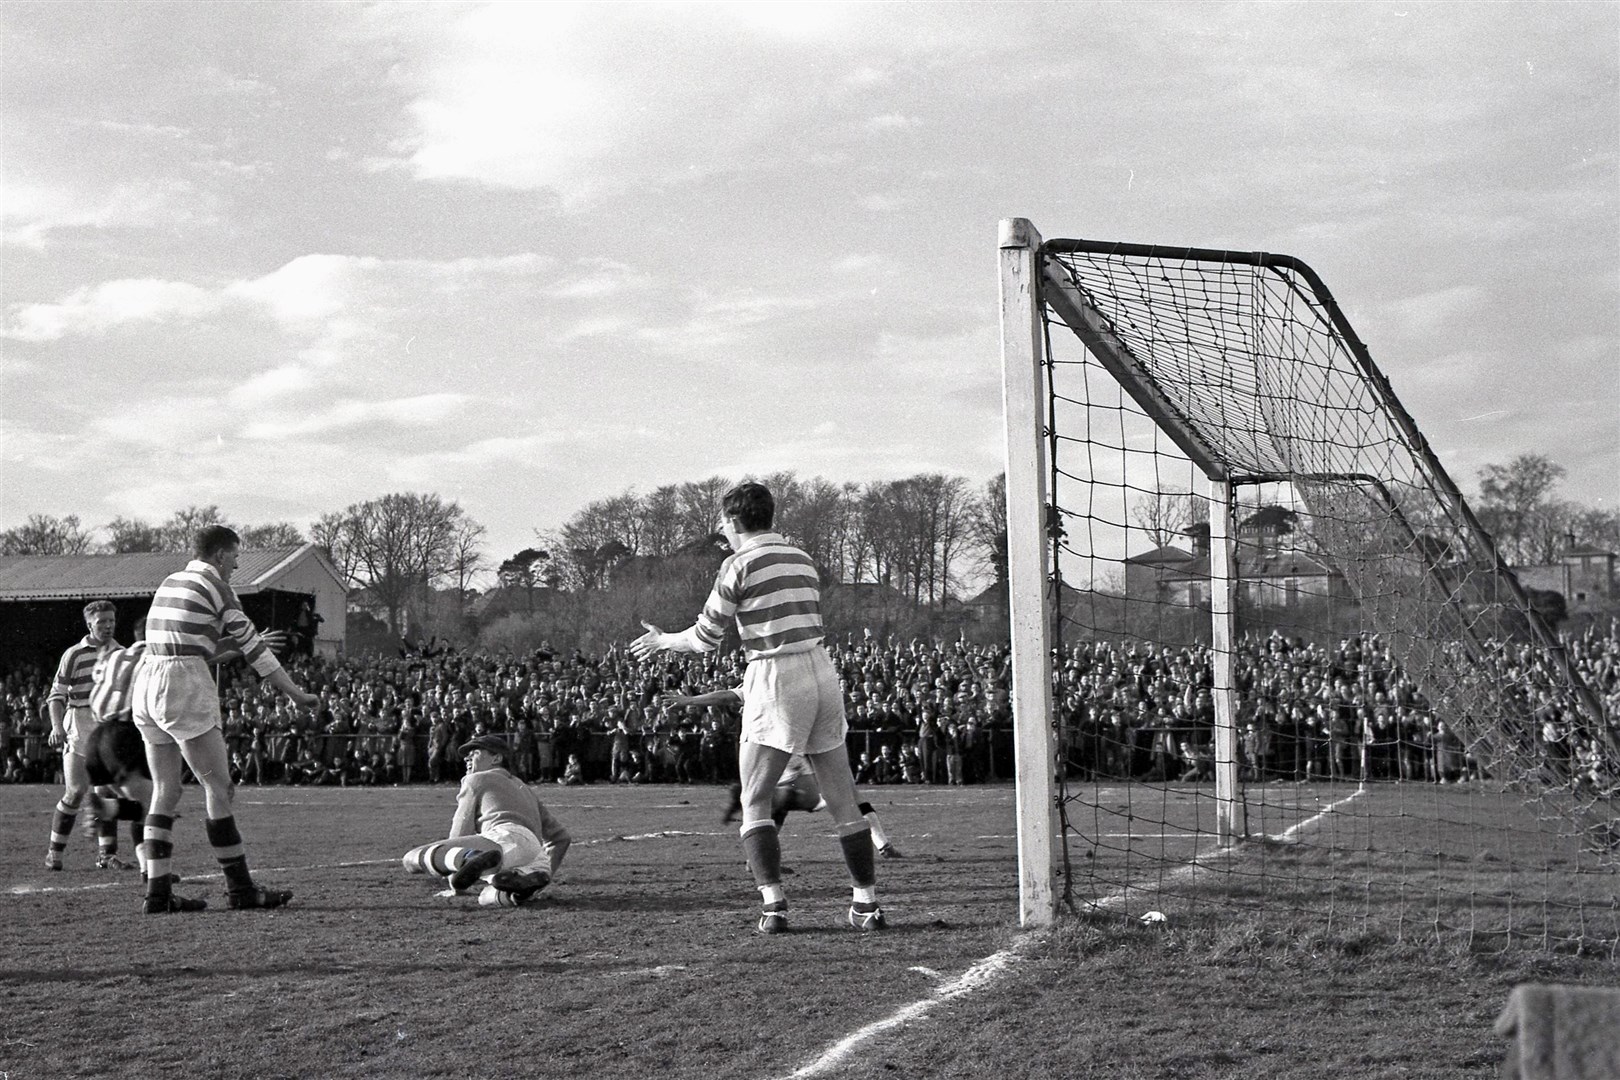 Action from the 1960 Scottish Cup tie against Celtic in front of what was at the time a record Borough Briggs crowd.